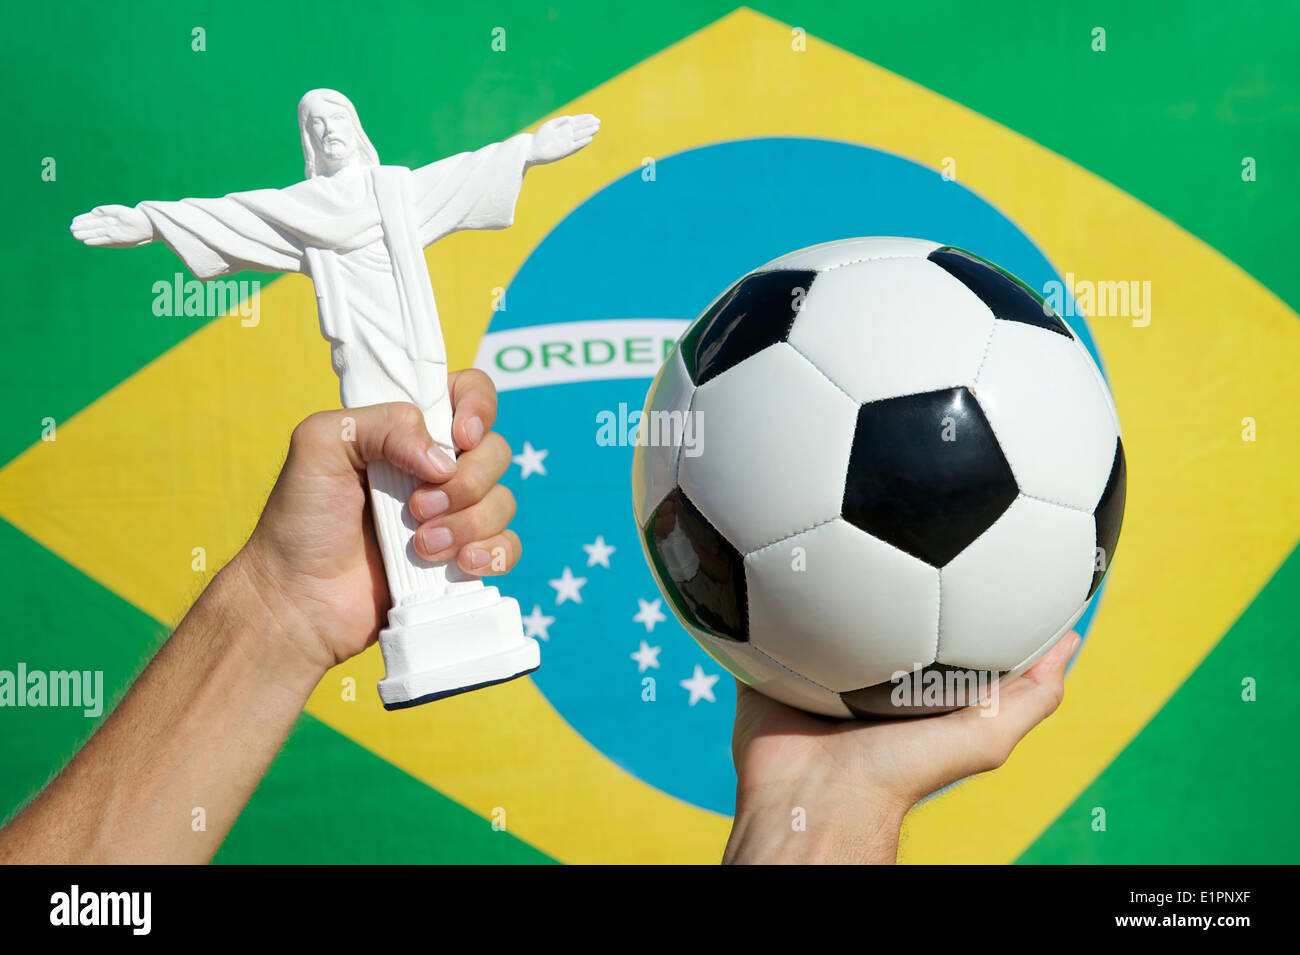 Hands holding football soccer ball and souvenir statue of Corcovado Cristo Redentor in front of Brazilian flag Stock Photo